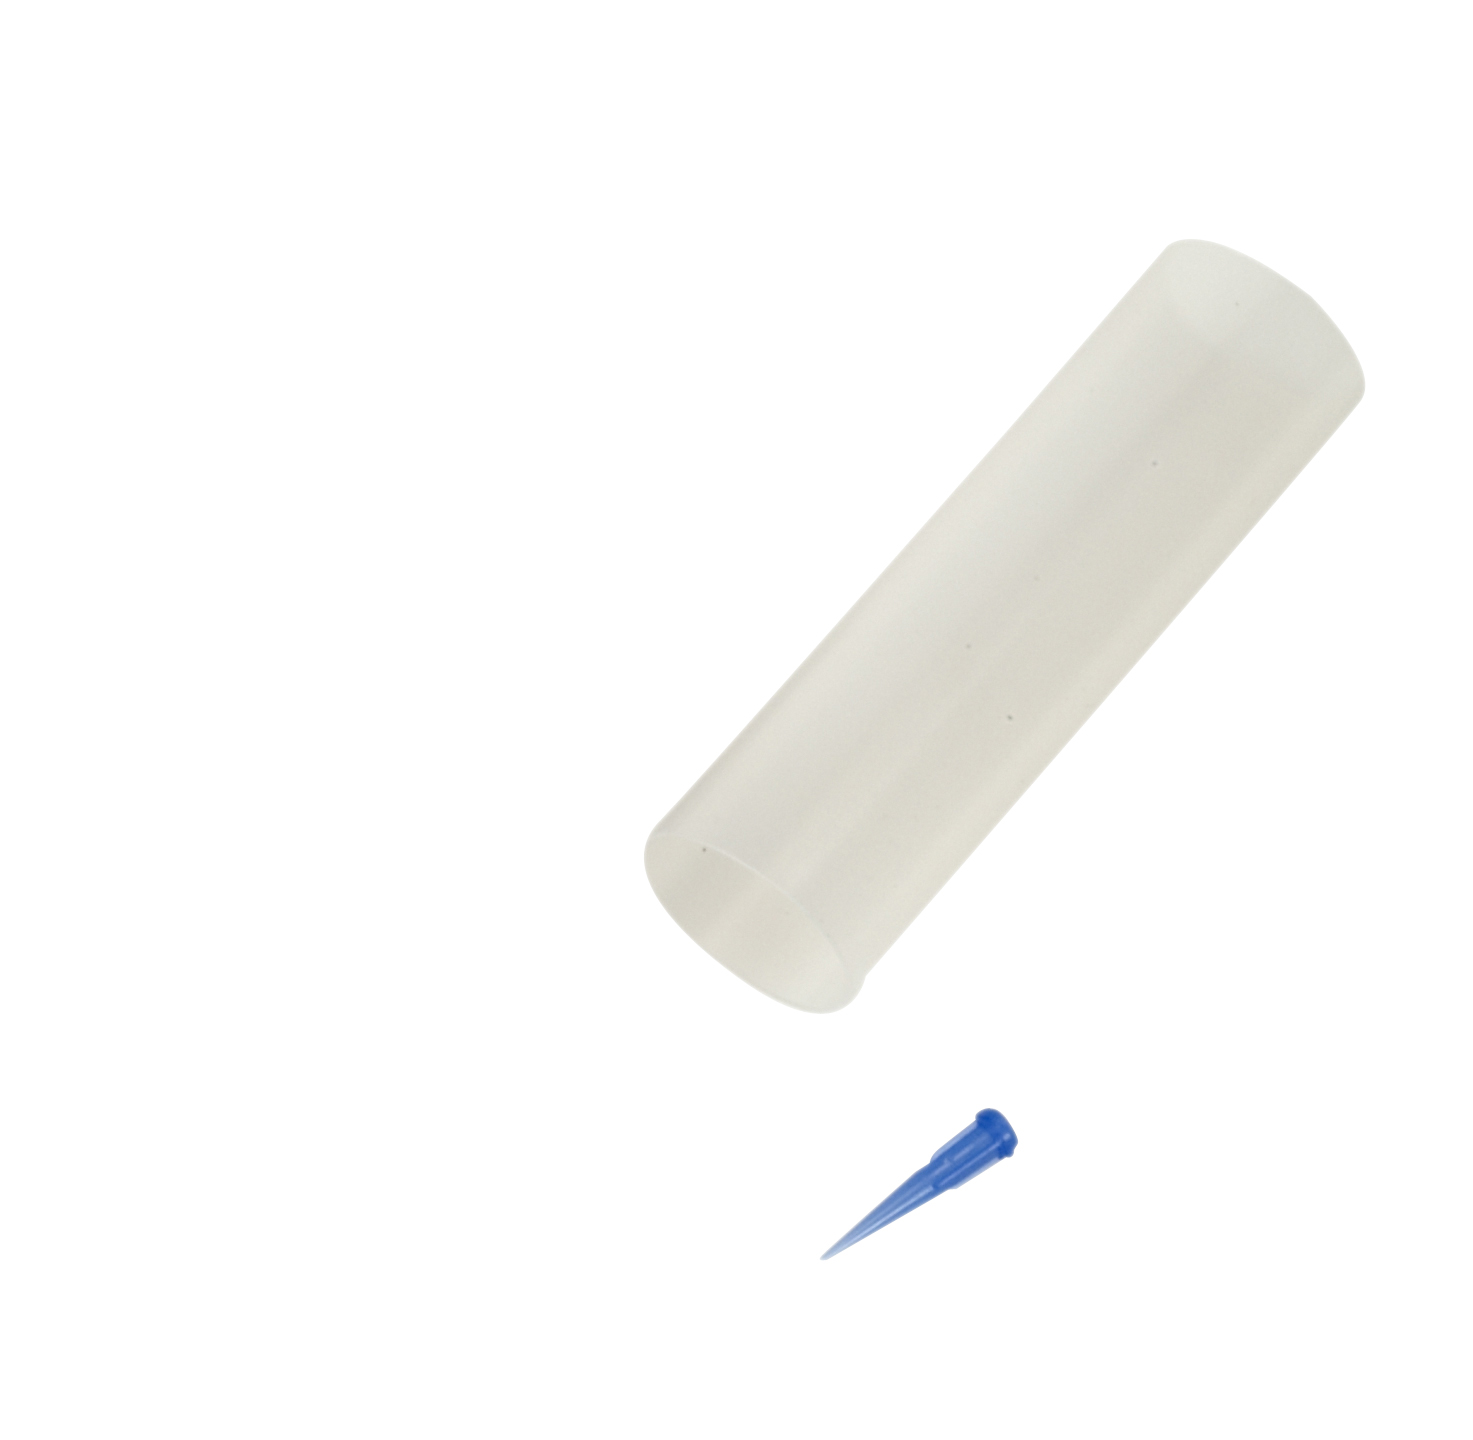 KRUUSE Replacement Cuff for Silicone Tube, size 28 mm
